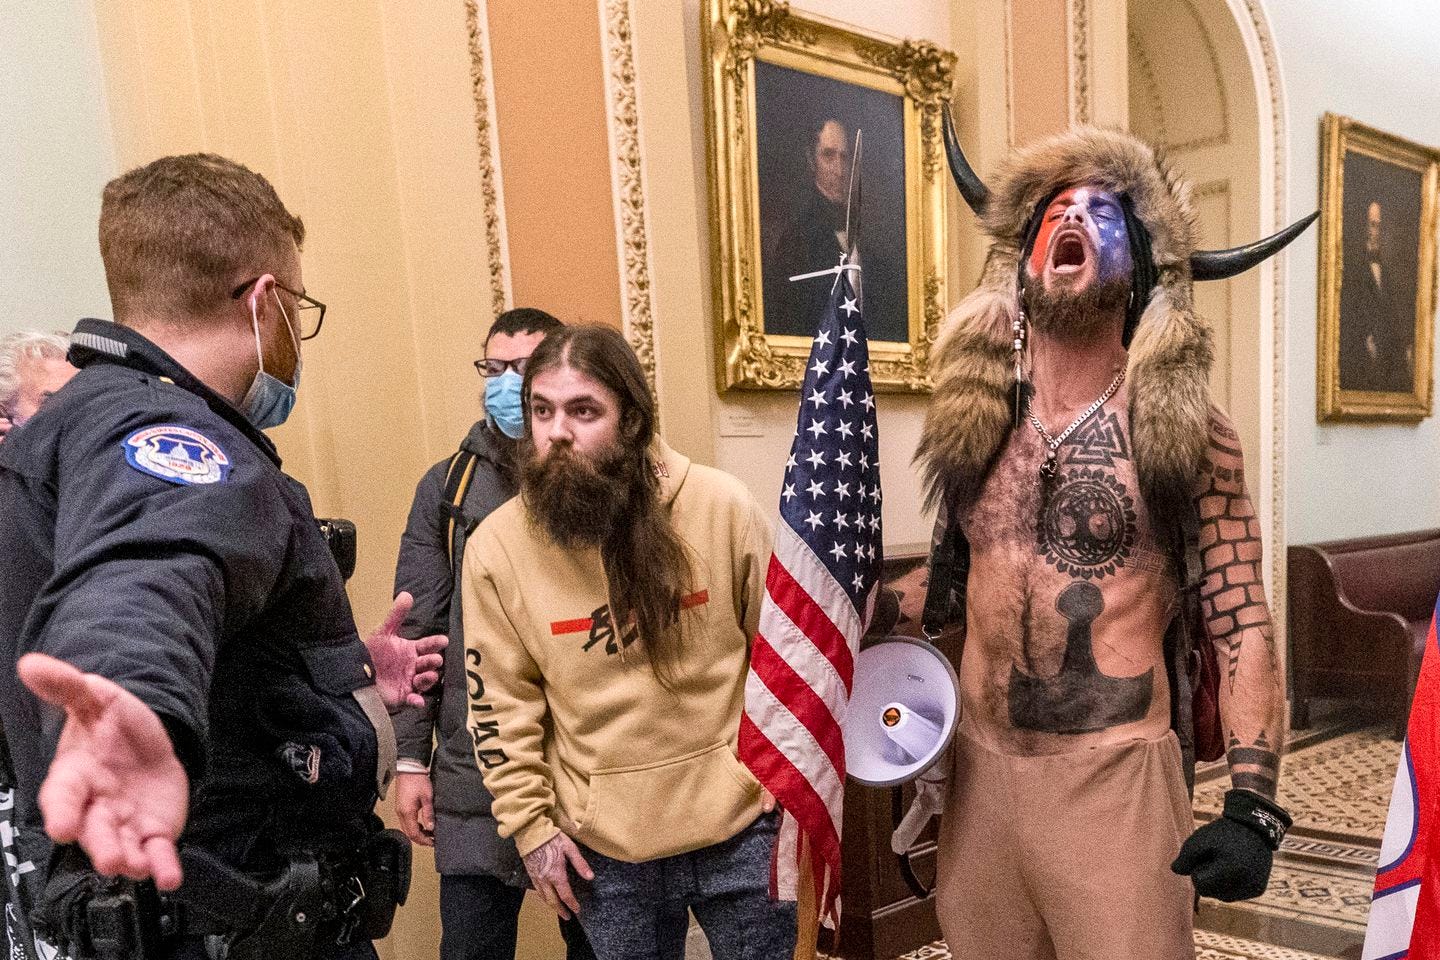 Jacob Chansley, right with fur hat, during the Jan. 6 Capitol riot in Washington. Chansley pleaded guilty Friday to a felony obstruction charge. He carried a flagpole topped with a spear into the insurrection, yelled into a bullhorn as officers tried to control the crowd, posed for photos on the Senate dais, and wrote a note to then-Vice President Mike Pence that prosecutors have said was threatening.